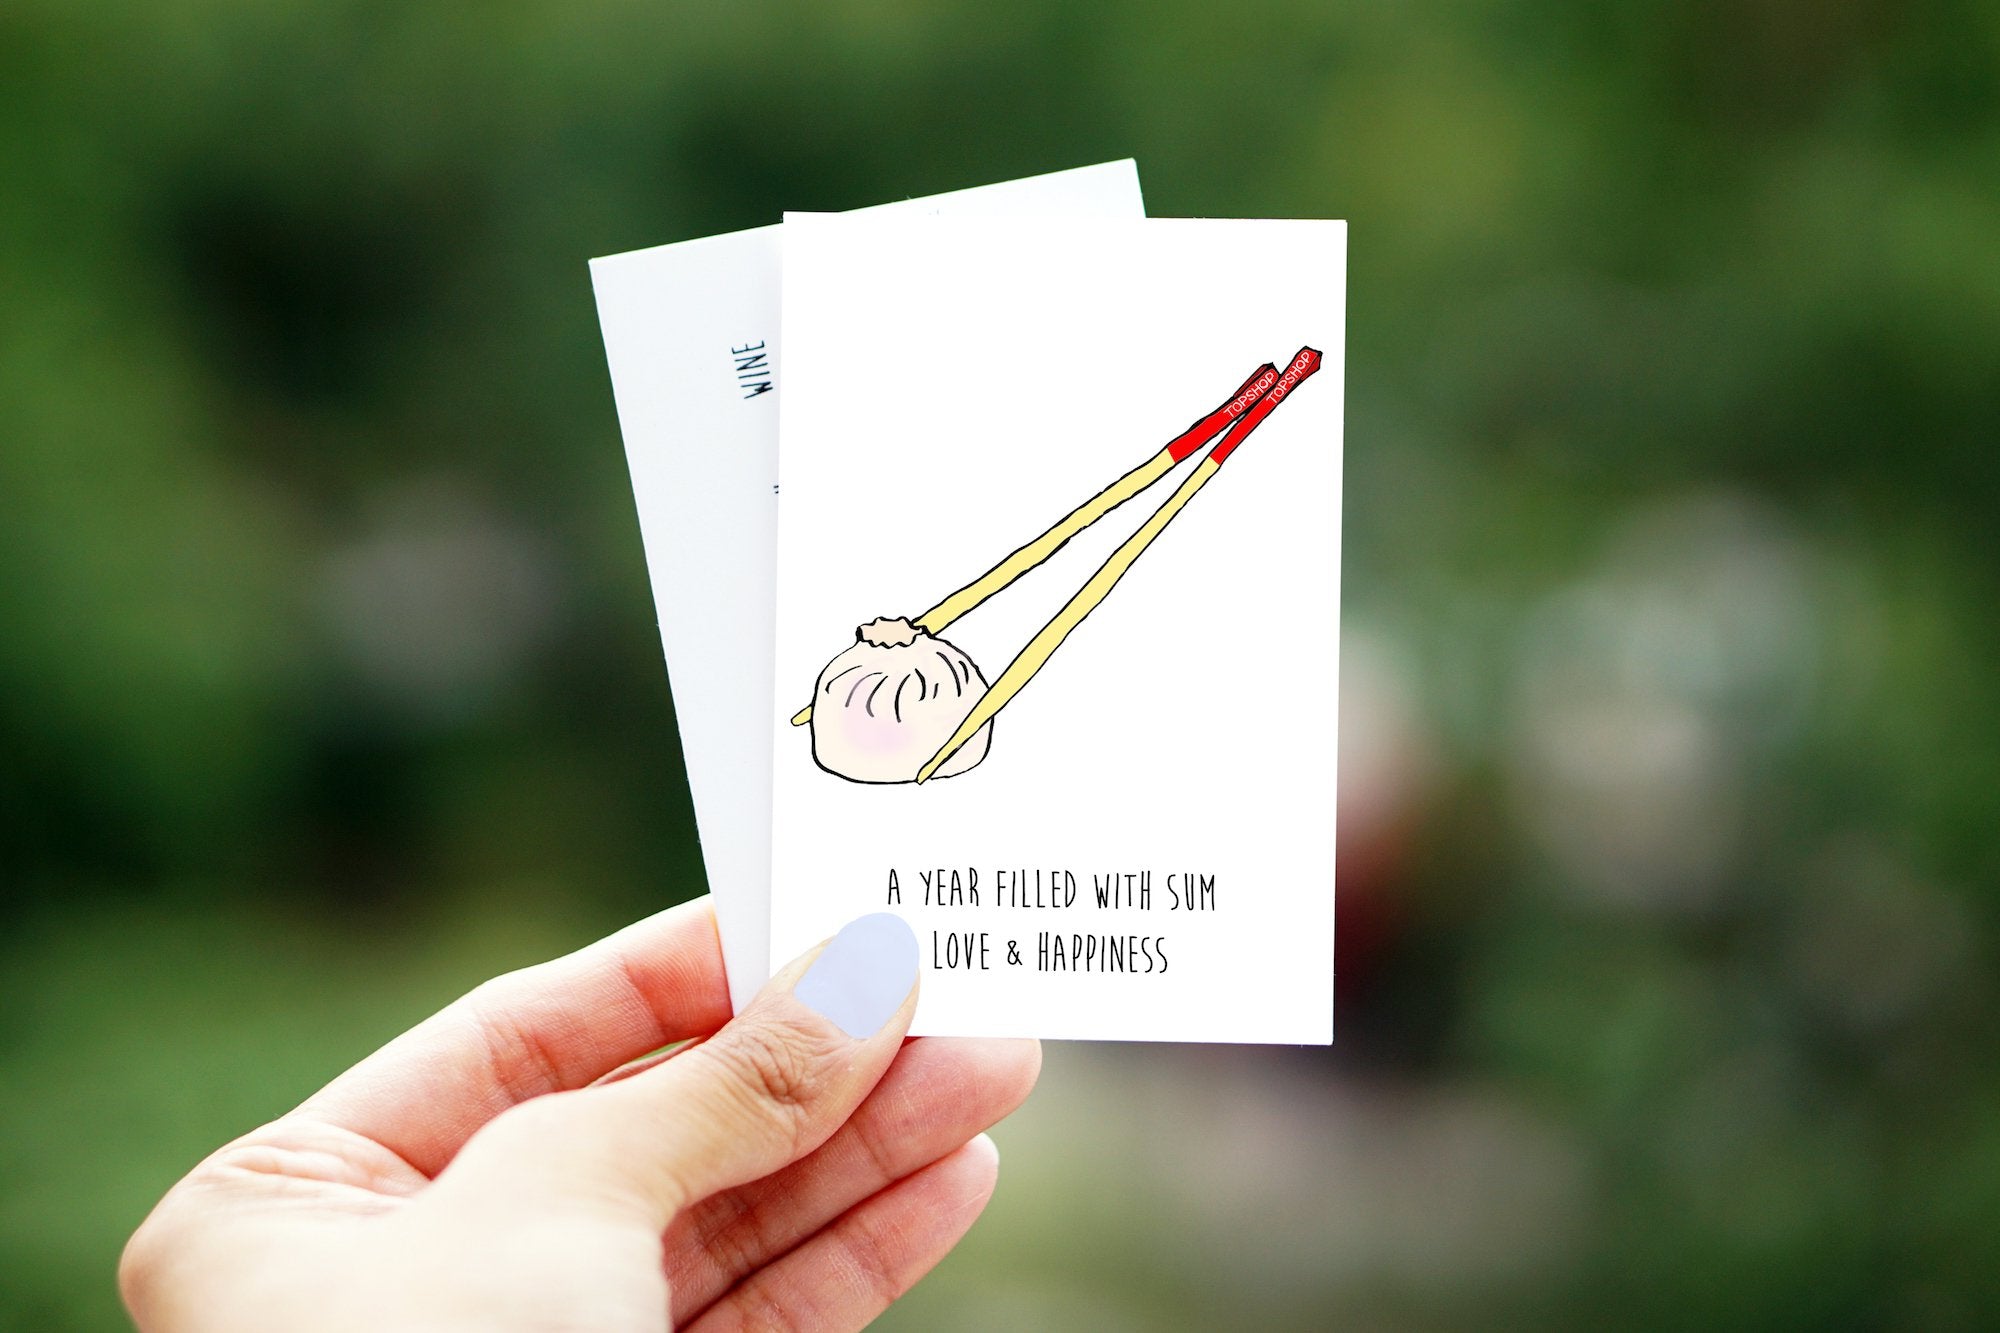 Custom mini cards for Topshop for Chinese New Year